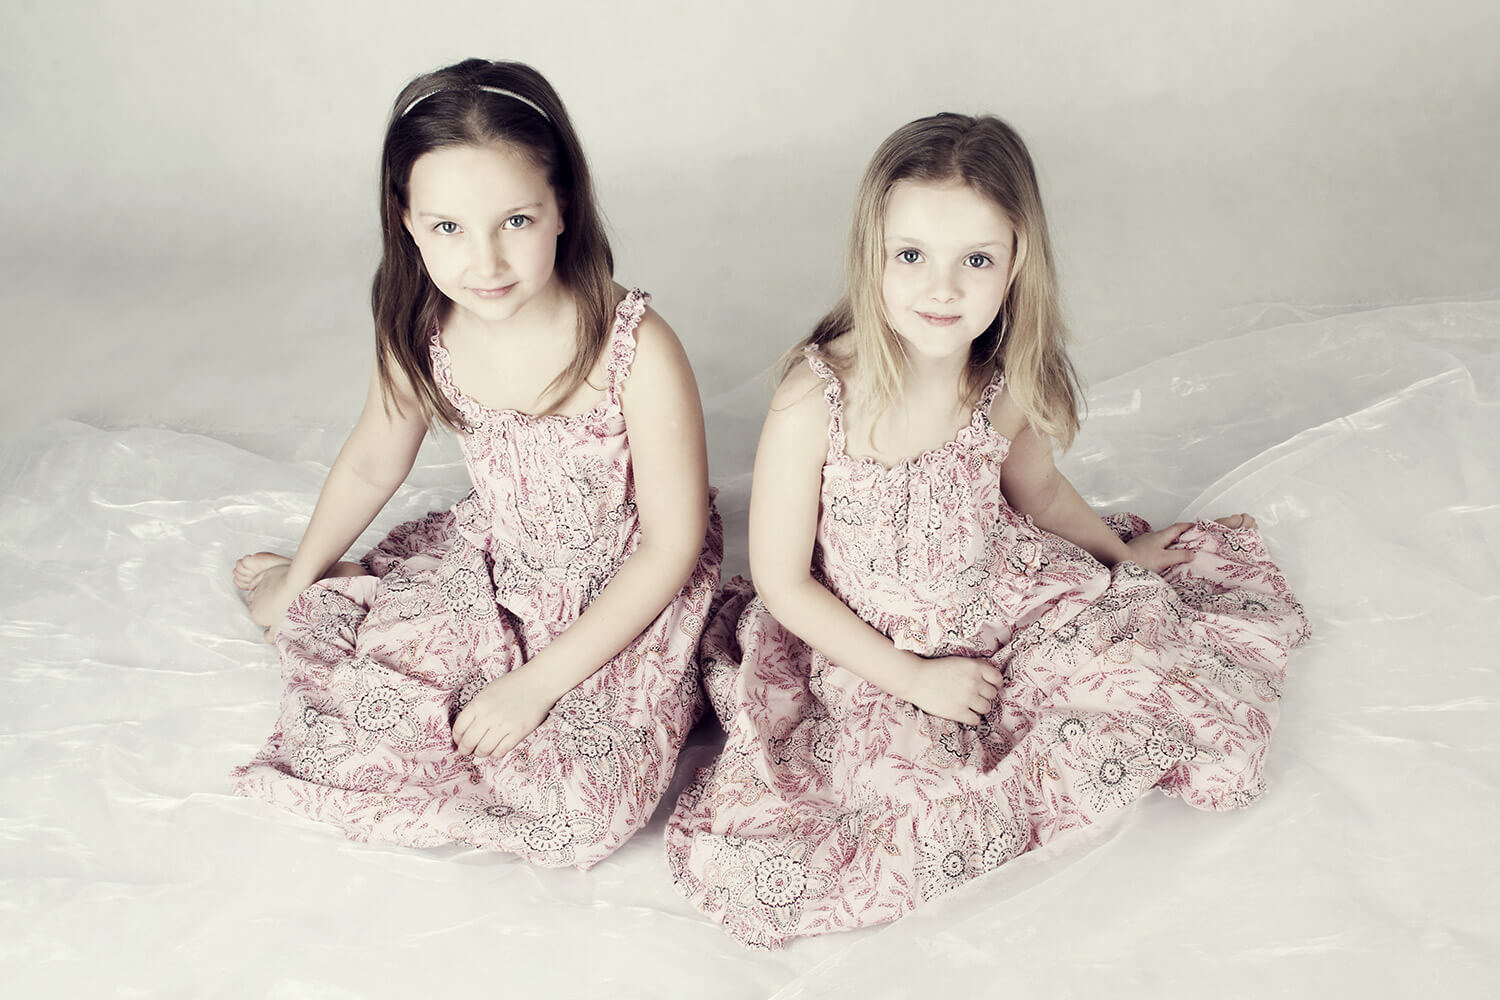 family photo of two sisters in flowered dresses on a light background